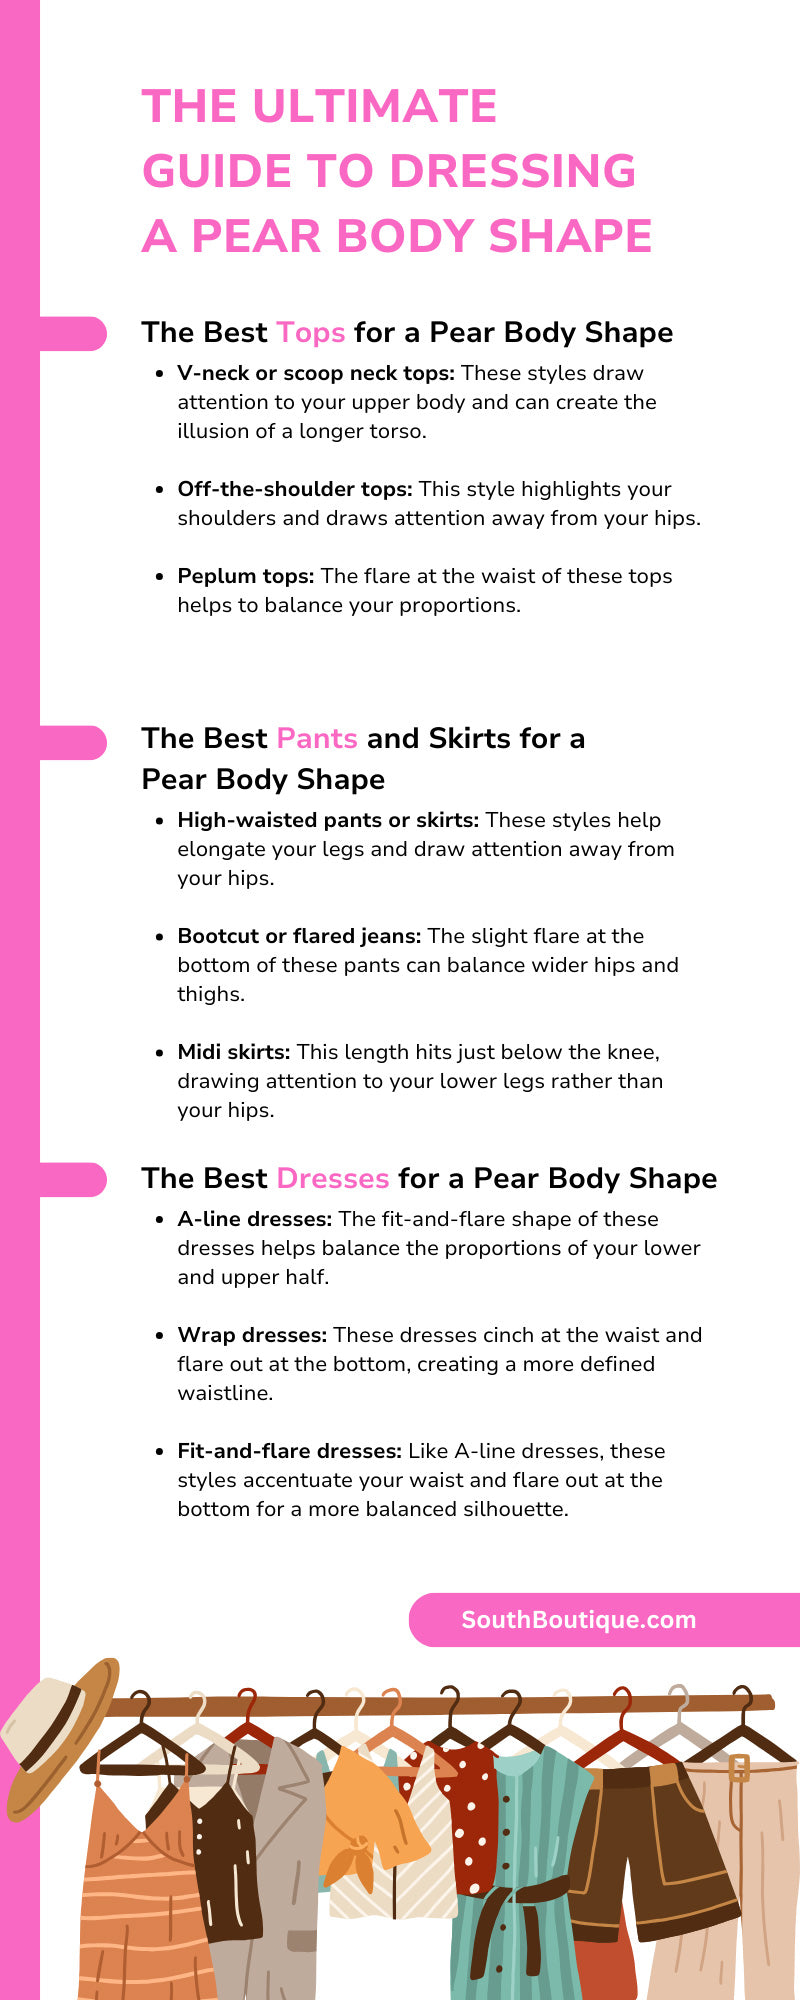 The Ultimate Guide to Dressing a Pear Body Shape